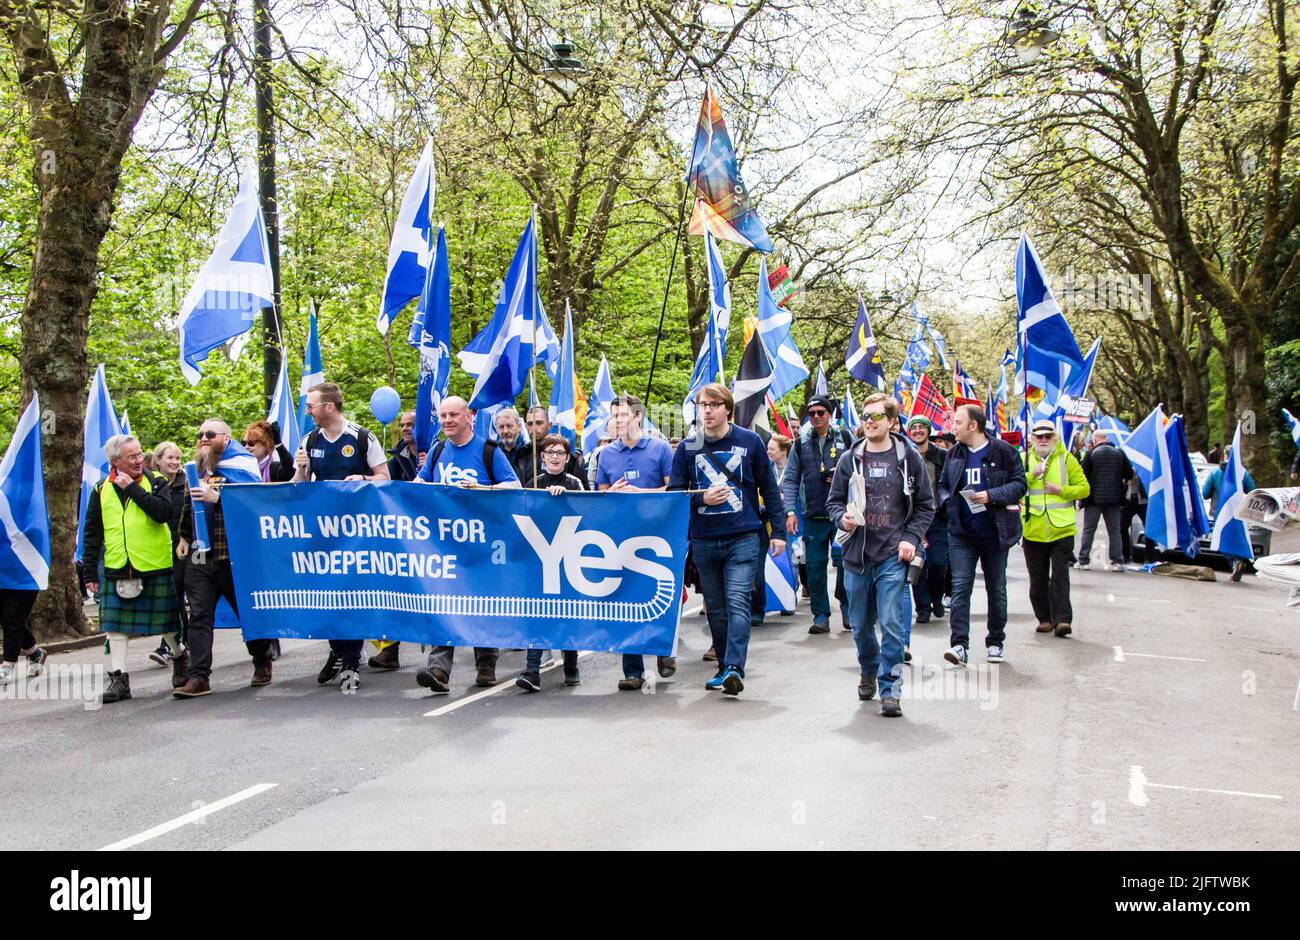 Indyref 2 March in Glasgow, Crowd of People with Scottish Flags and Banner 'Rail Workers for Independence' Stock Photo